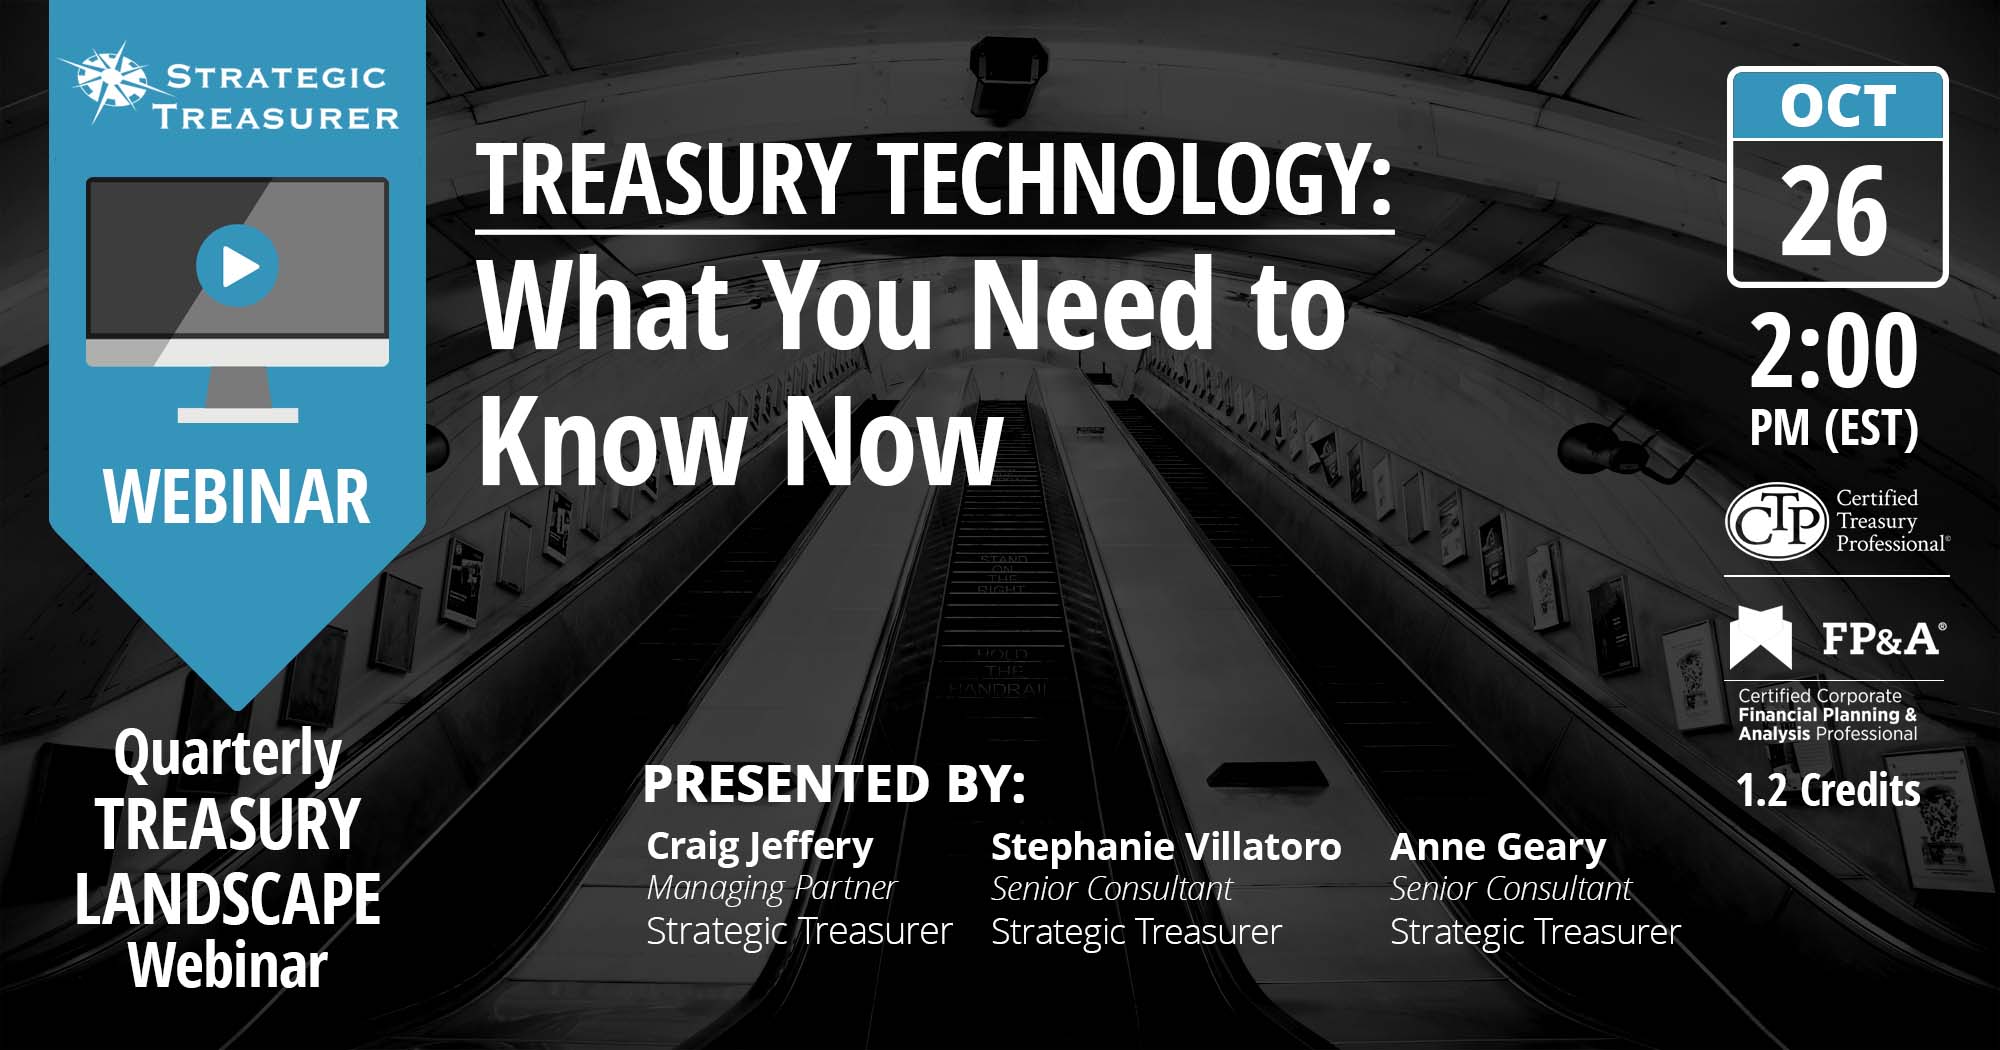 Webinar - Treasury Technology: What You Need to Know